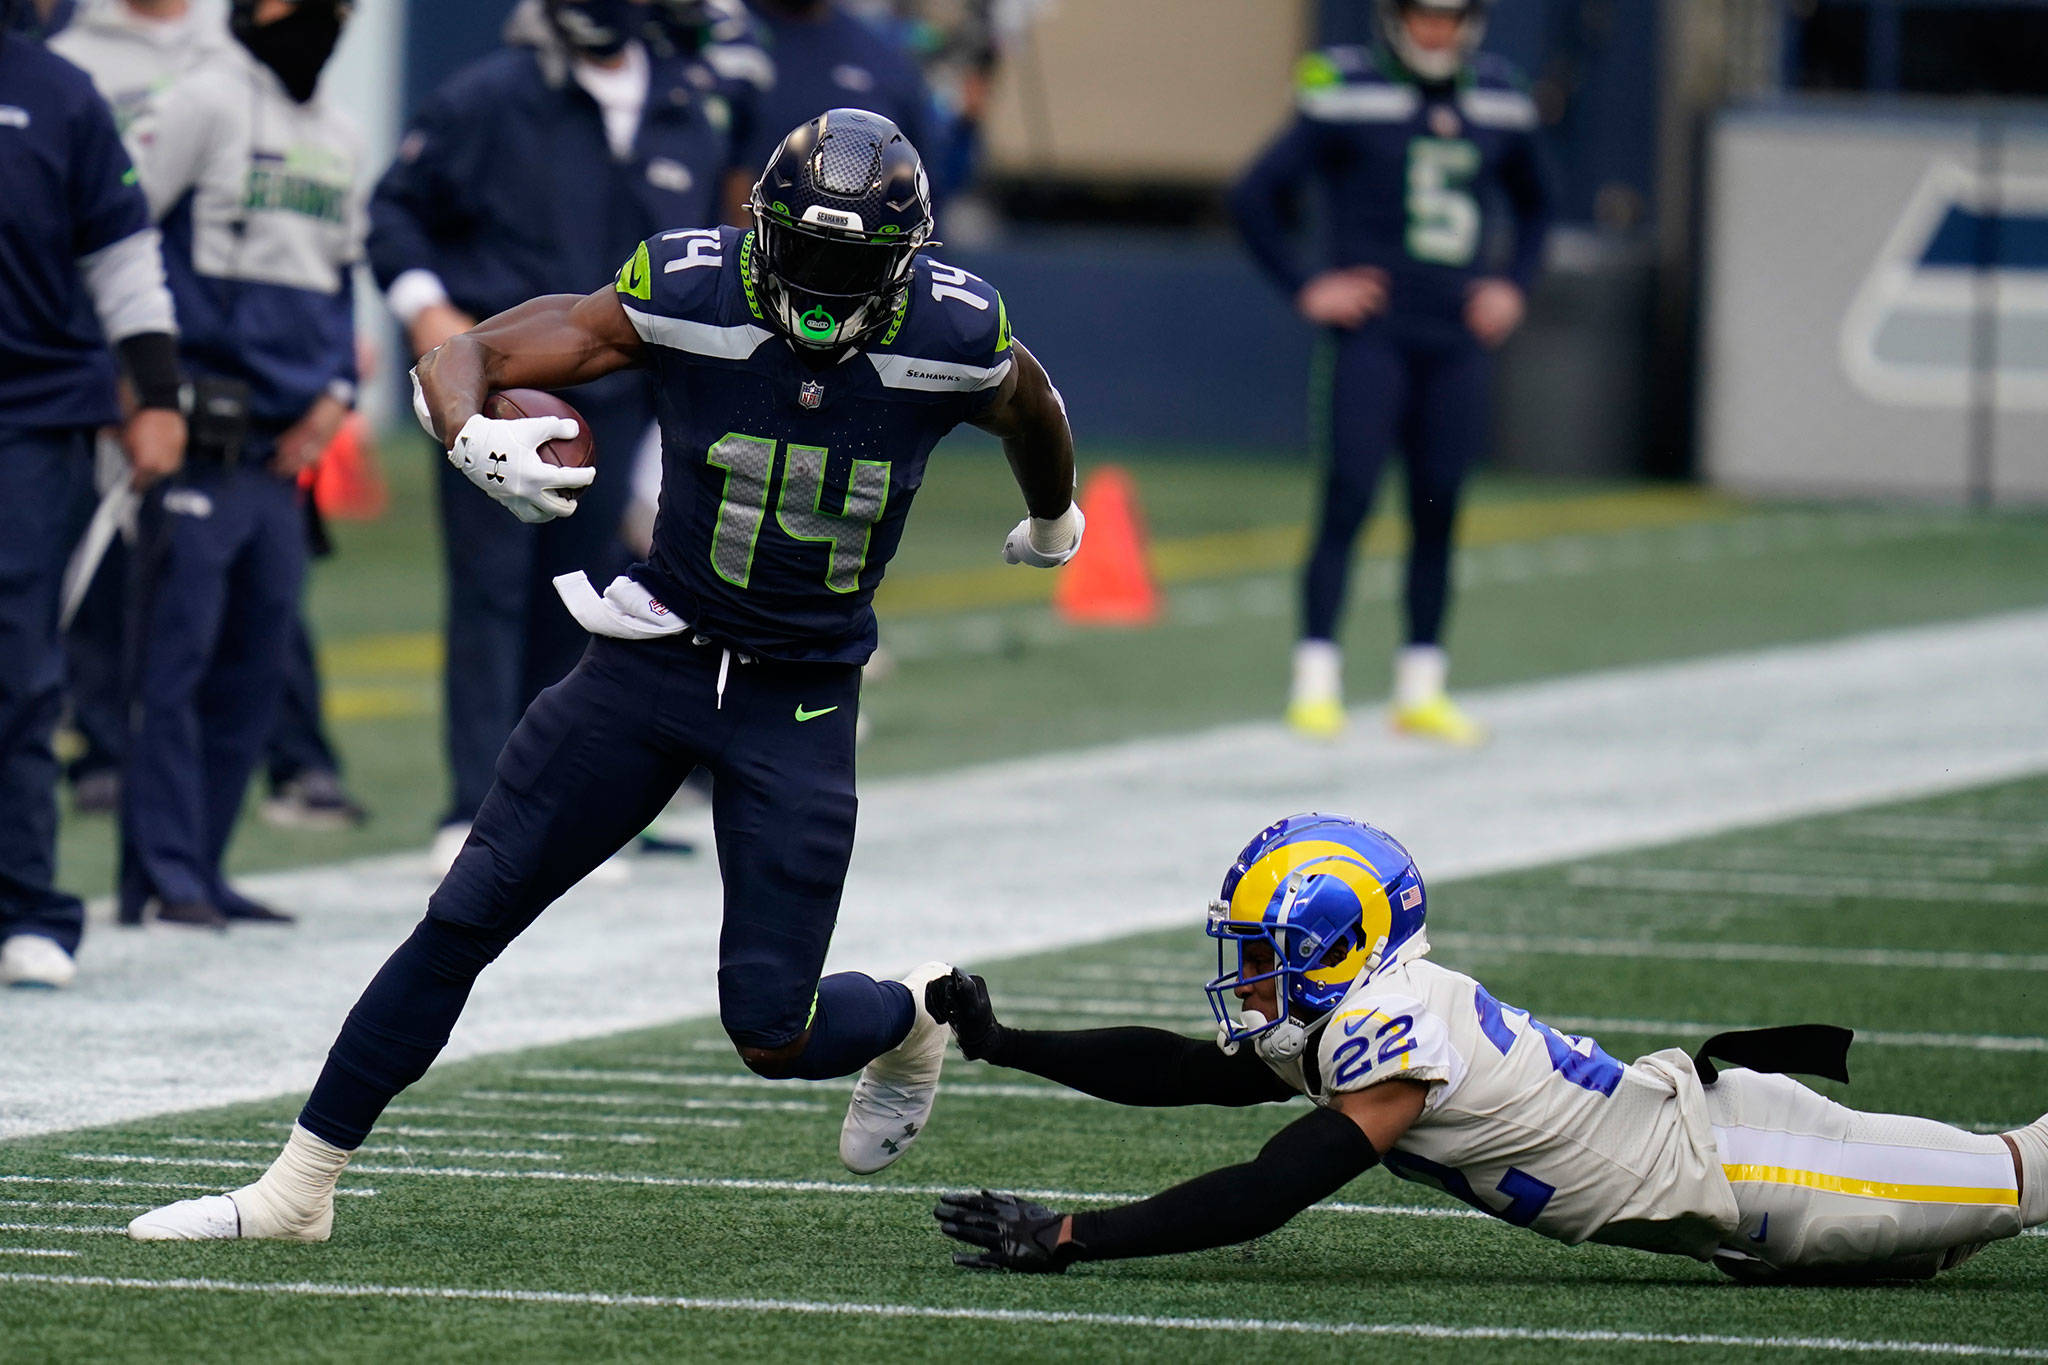 Seahawks wide receiver DK Metcalf (14) runs past Rams cornerback Troy Hill (22) during the first half of a game Dec. 27, 2020, in Seattle. (AP Photo/Elaine Thompson)